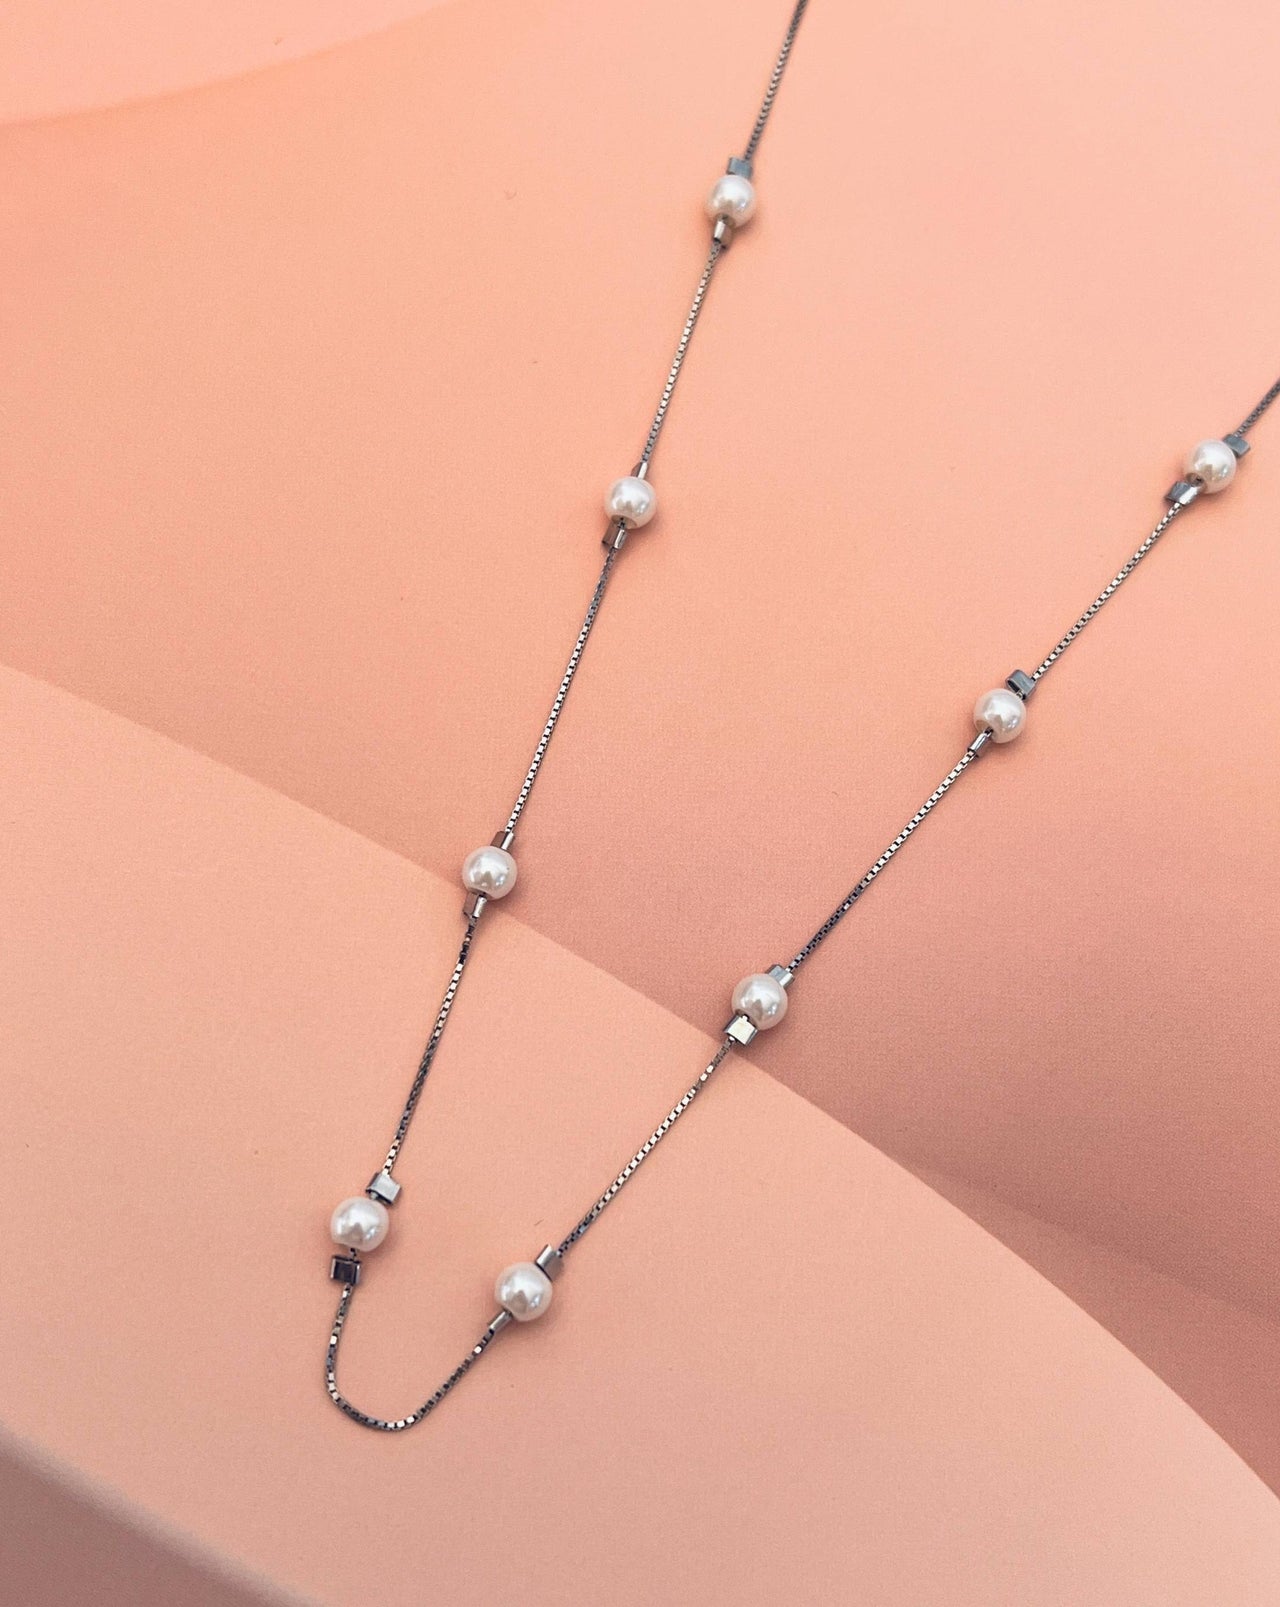 Purest Silver Chain